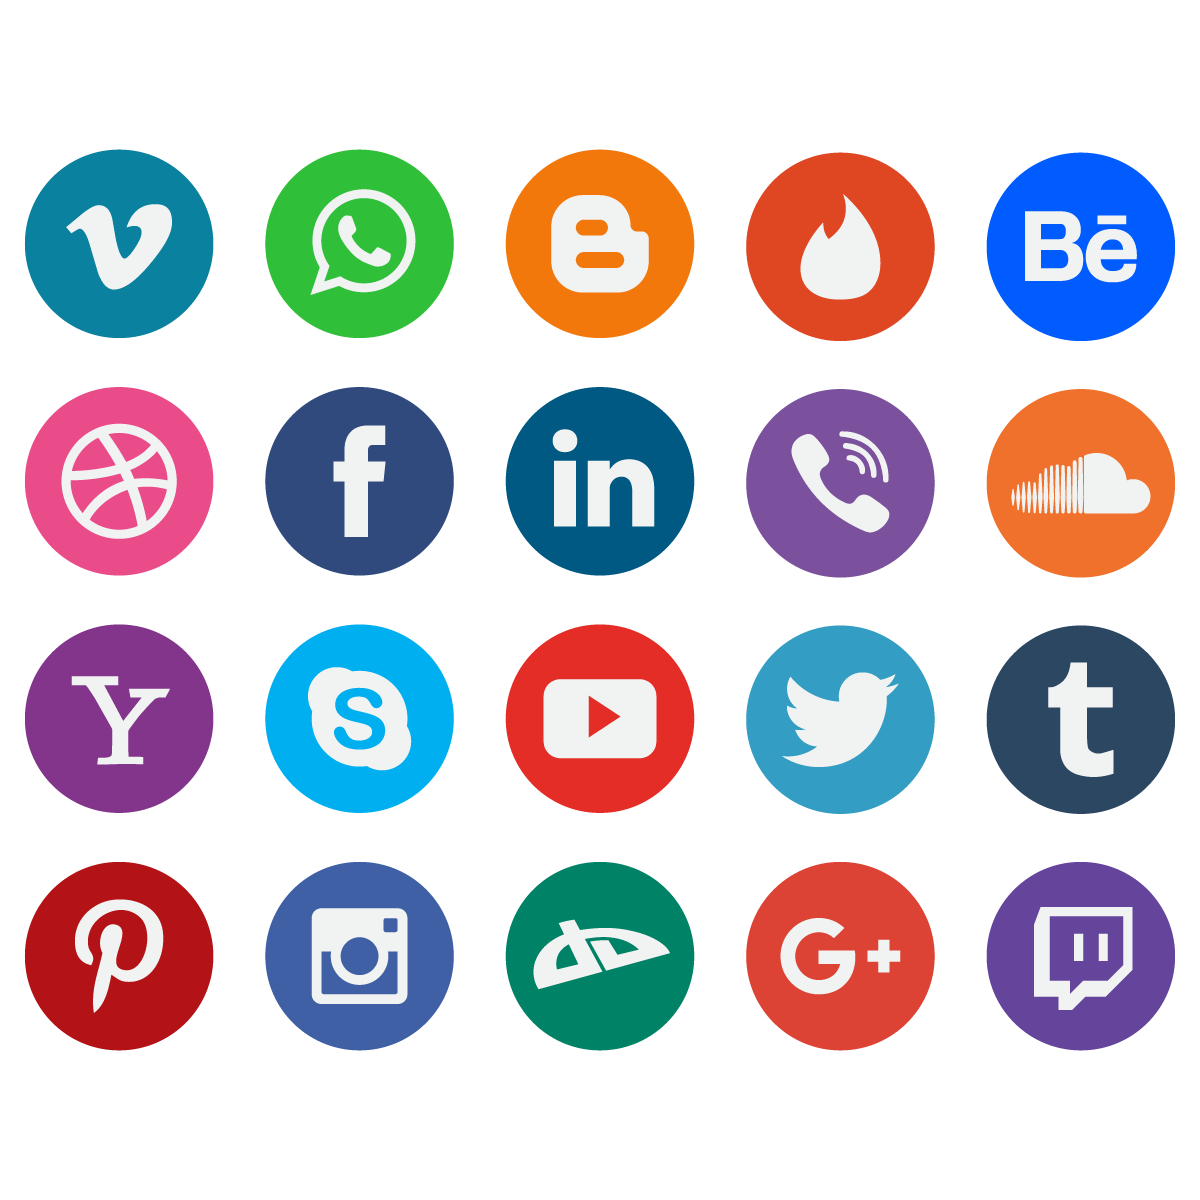 Social Media Symbols And Meanings